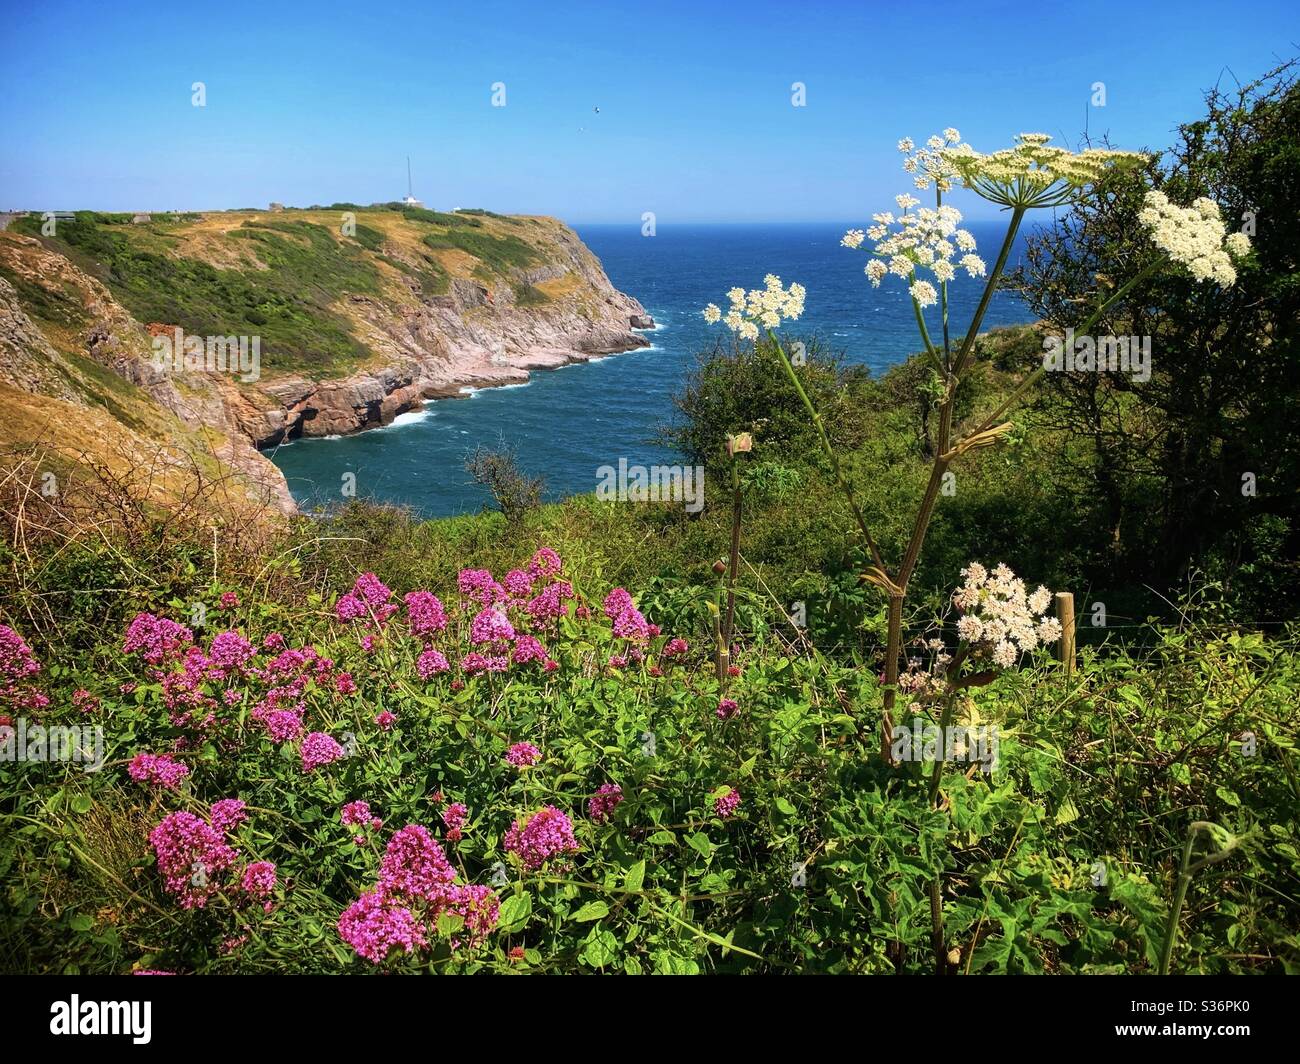 Landscape orientation of a beautiful sea view of Berry Head in Brixham, Davon. Blue sea, blue sky framed by green foliage and colourful flowers. Stock Photo